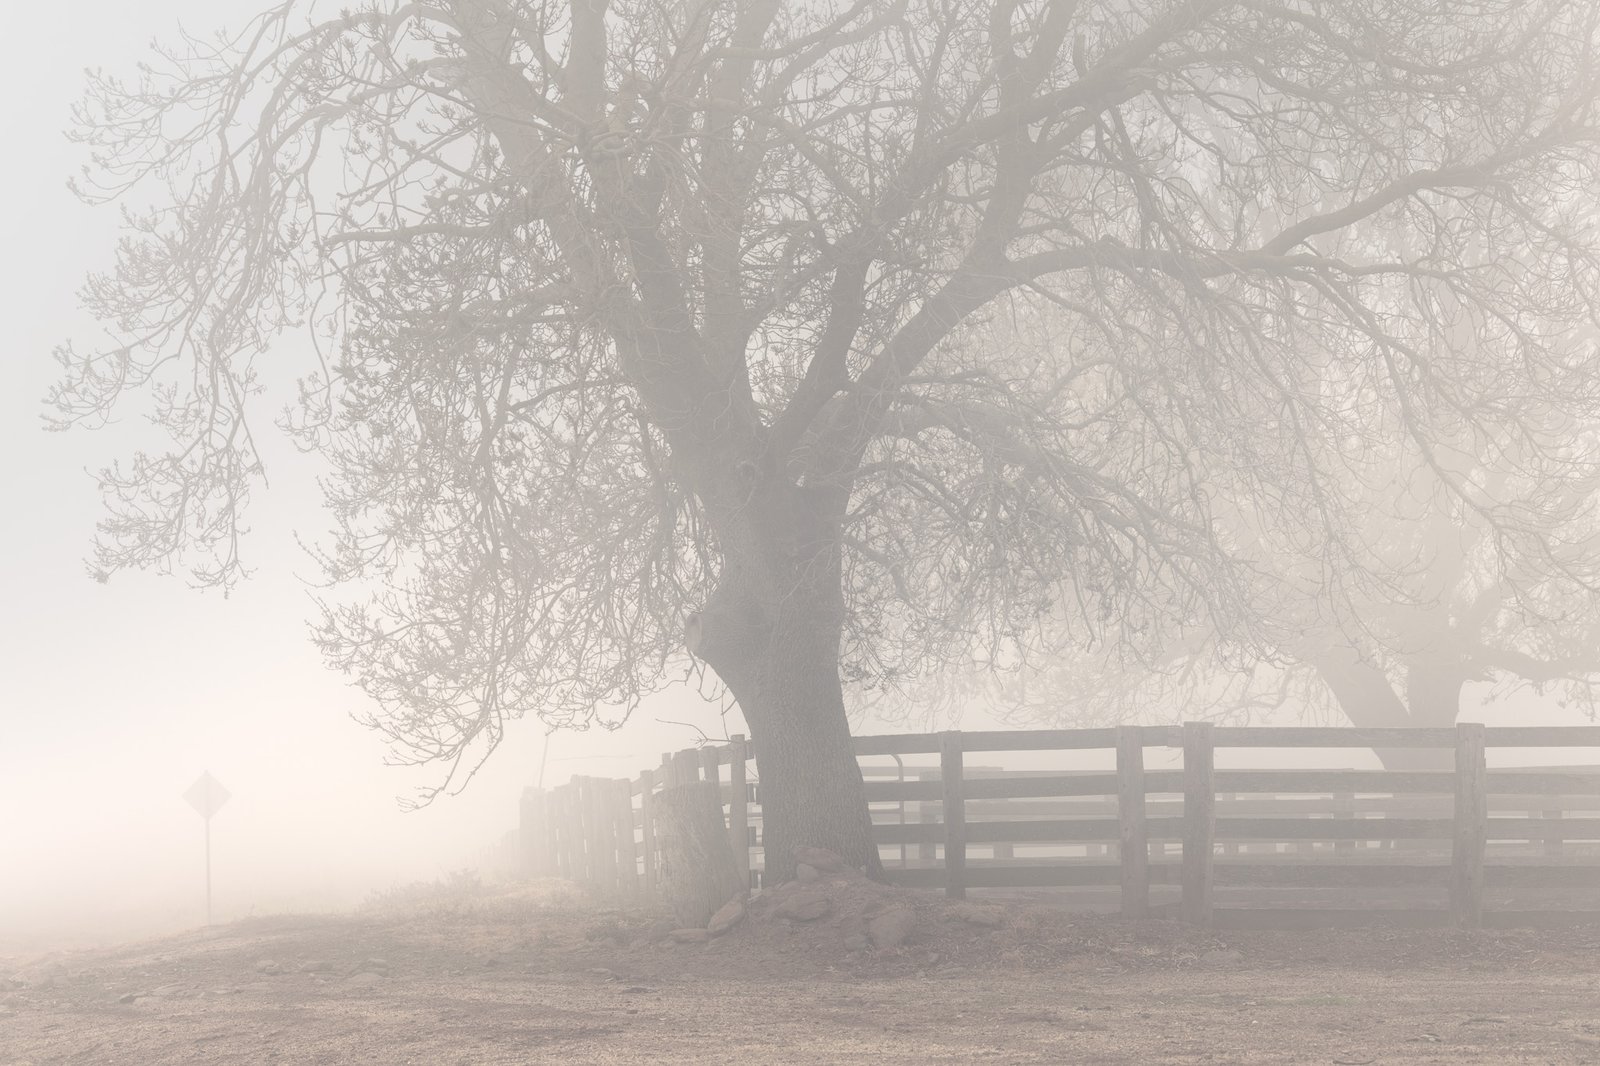 Cattle yard and tree in fog